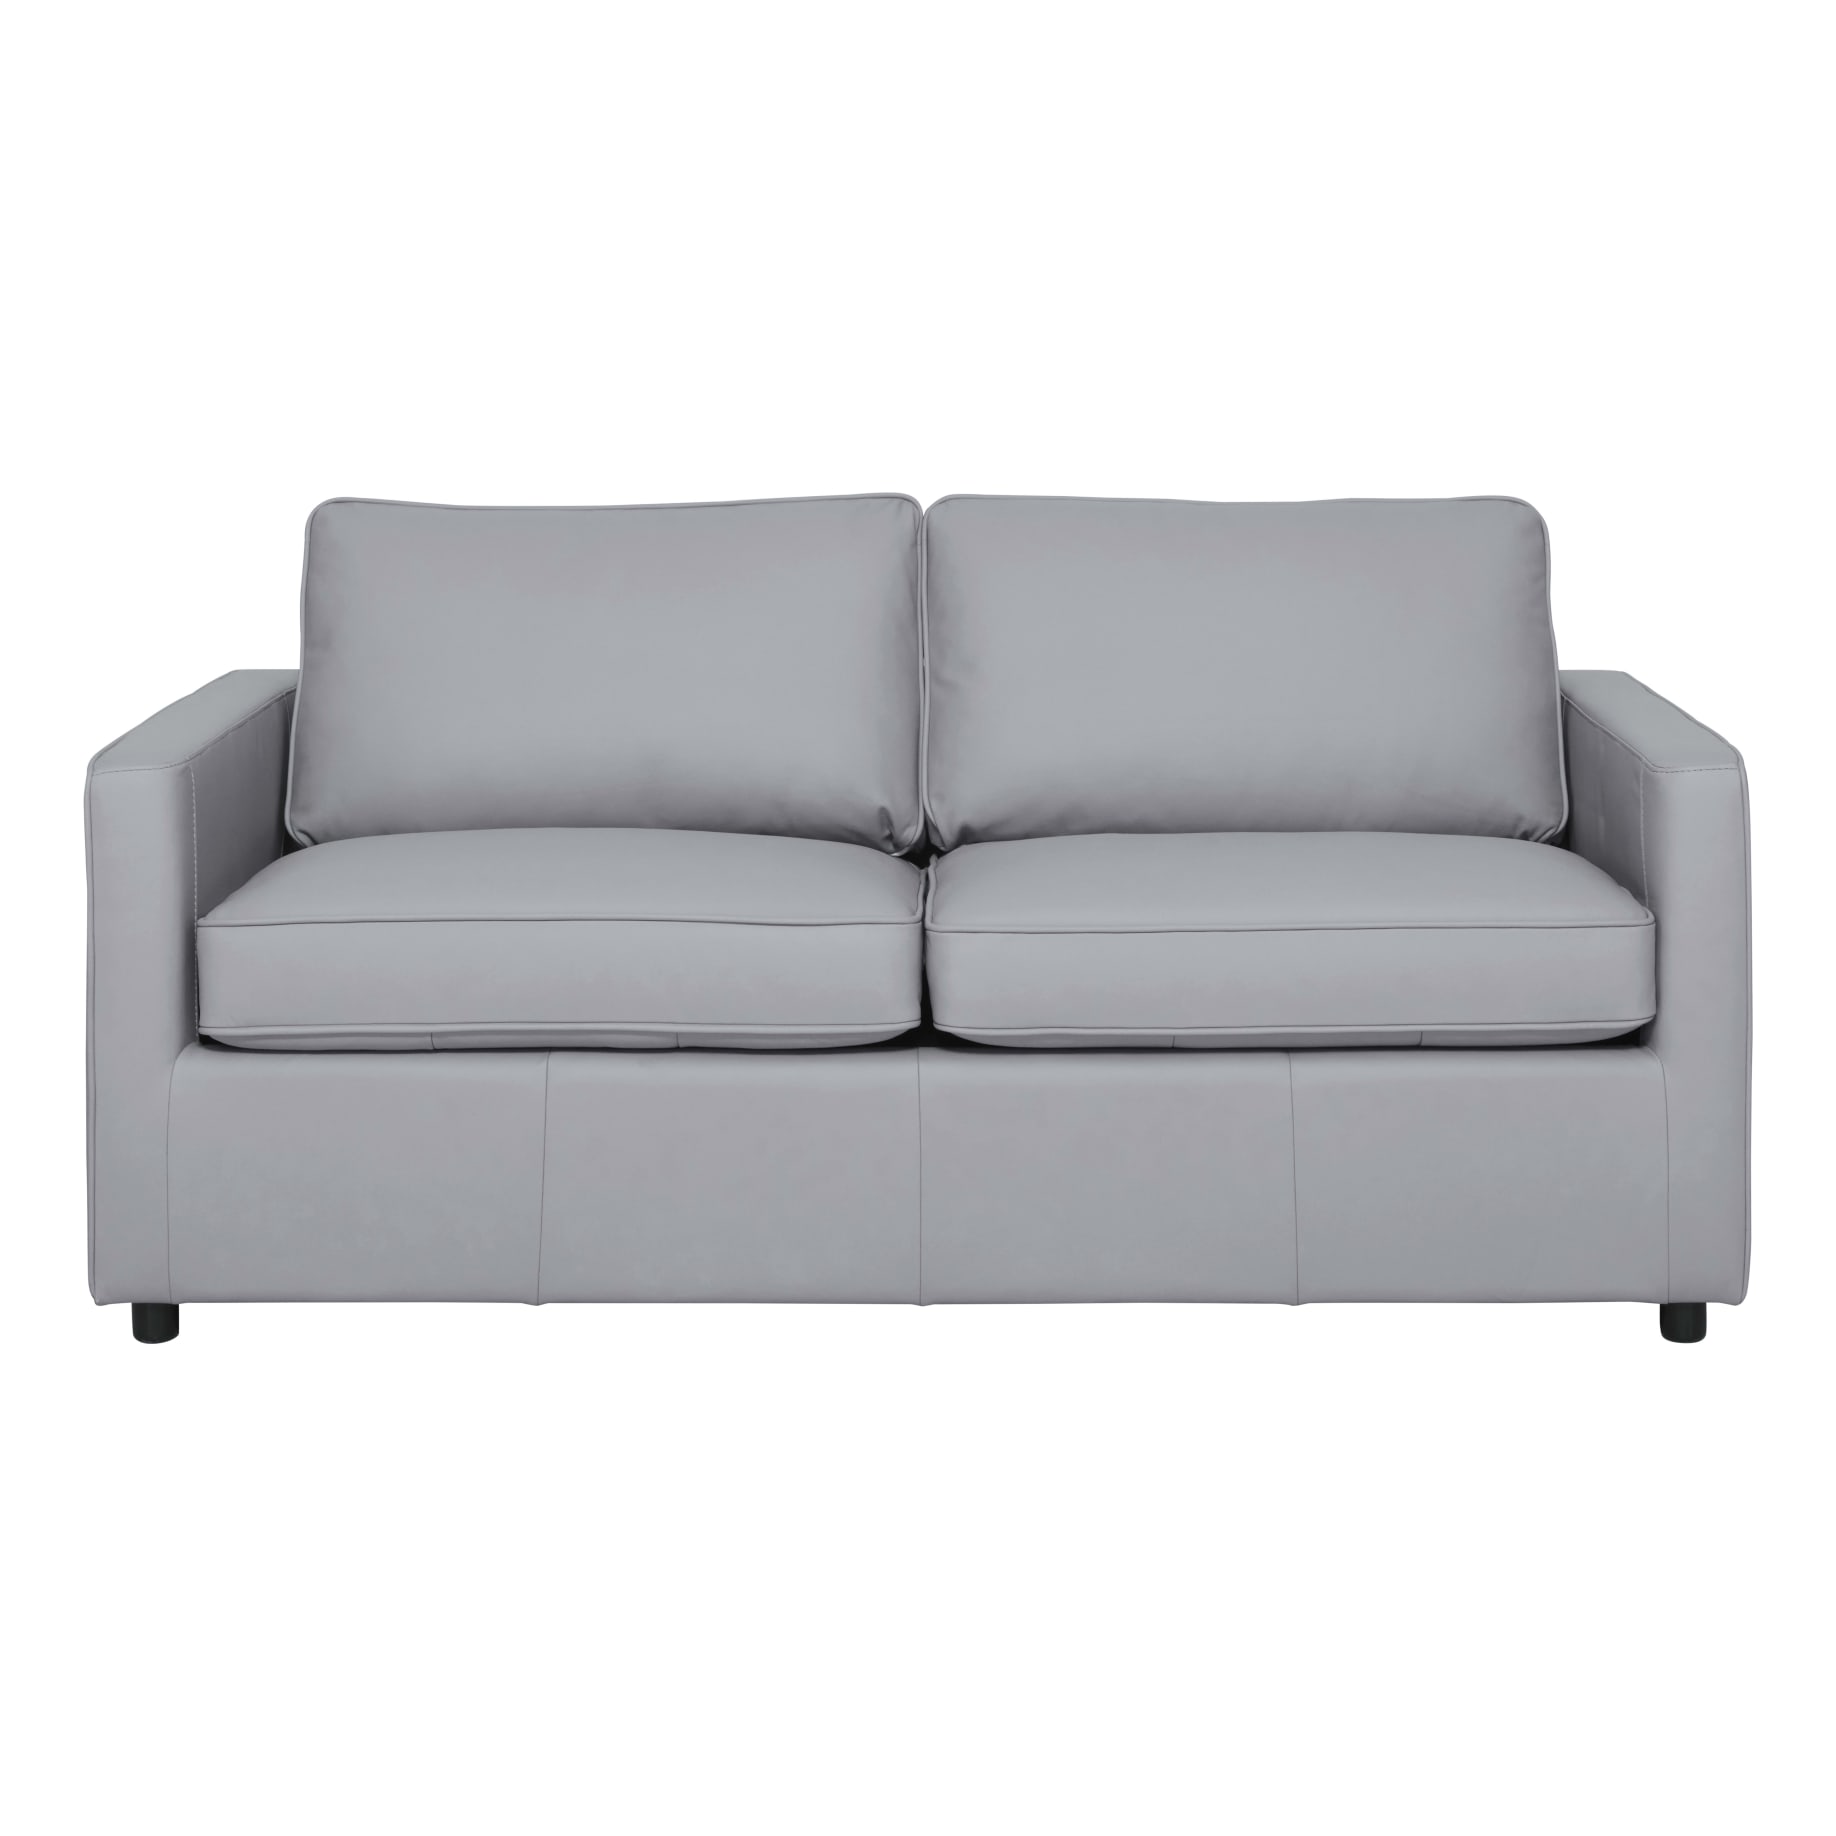 Ronin Sofabed in Leather Pewter